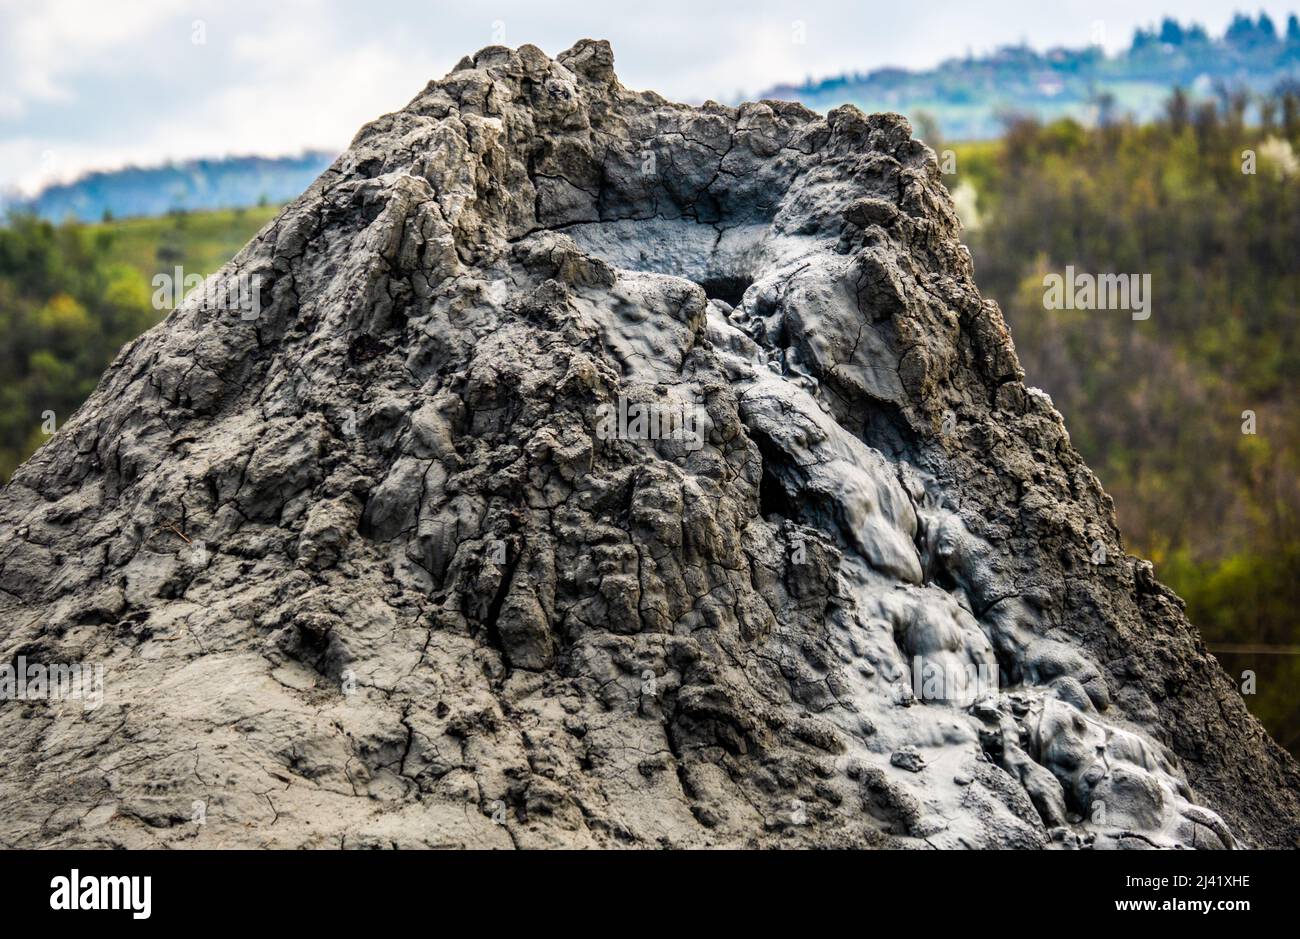 mud volcano or mud dome in Italy, geological phenomenon by eruption of mud, water and methane gas Stock Photo